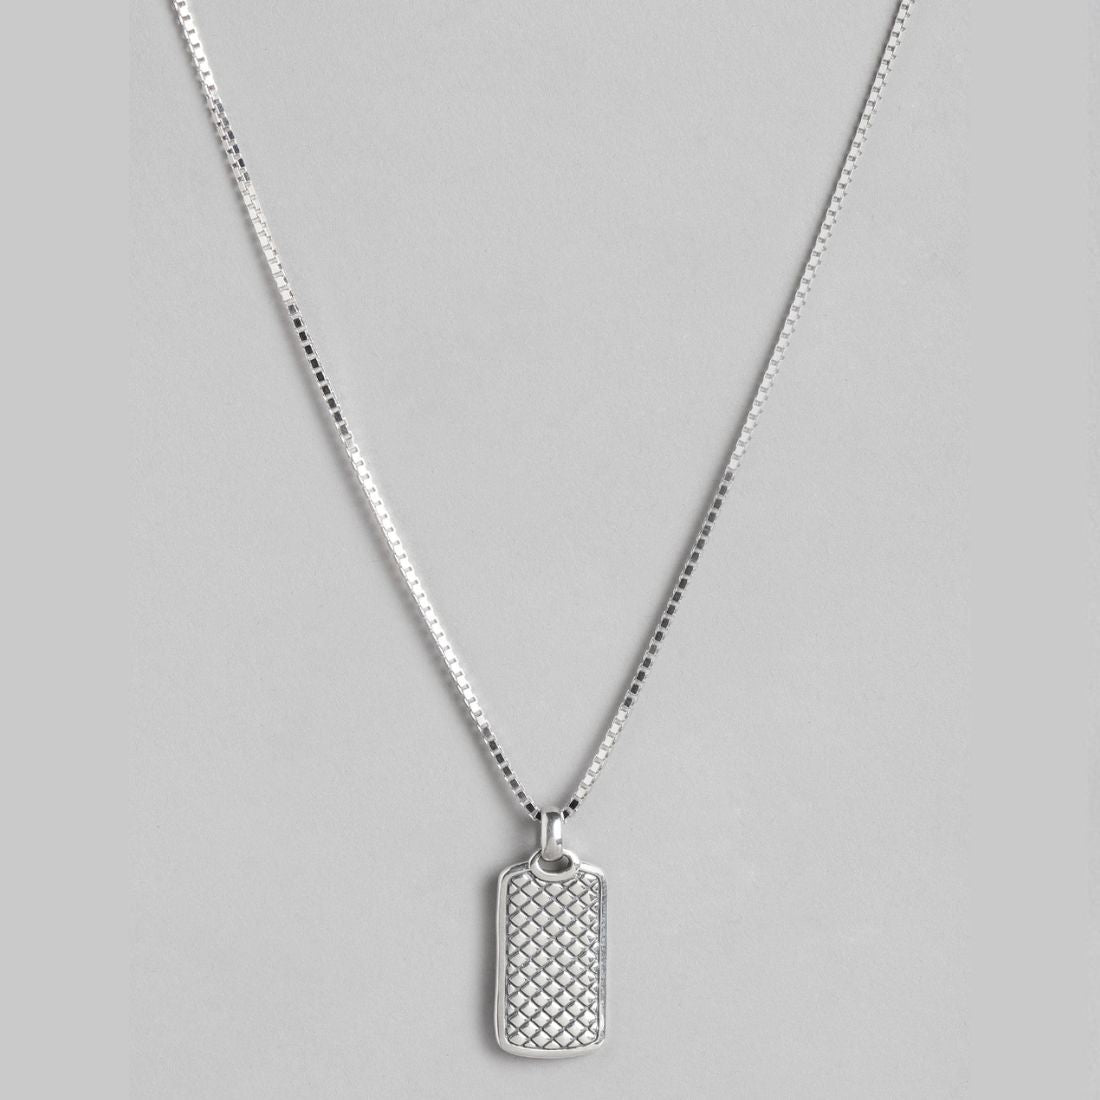 Rhodium Plated classic Chain in 925 Sterling Silver Necklace for Him